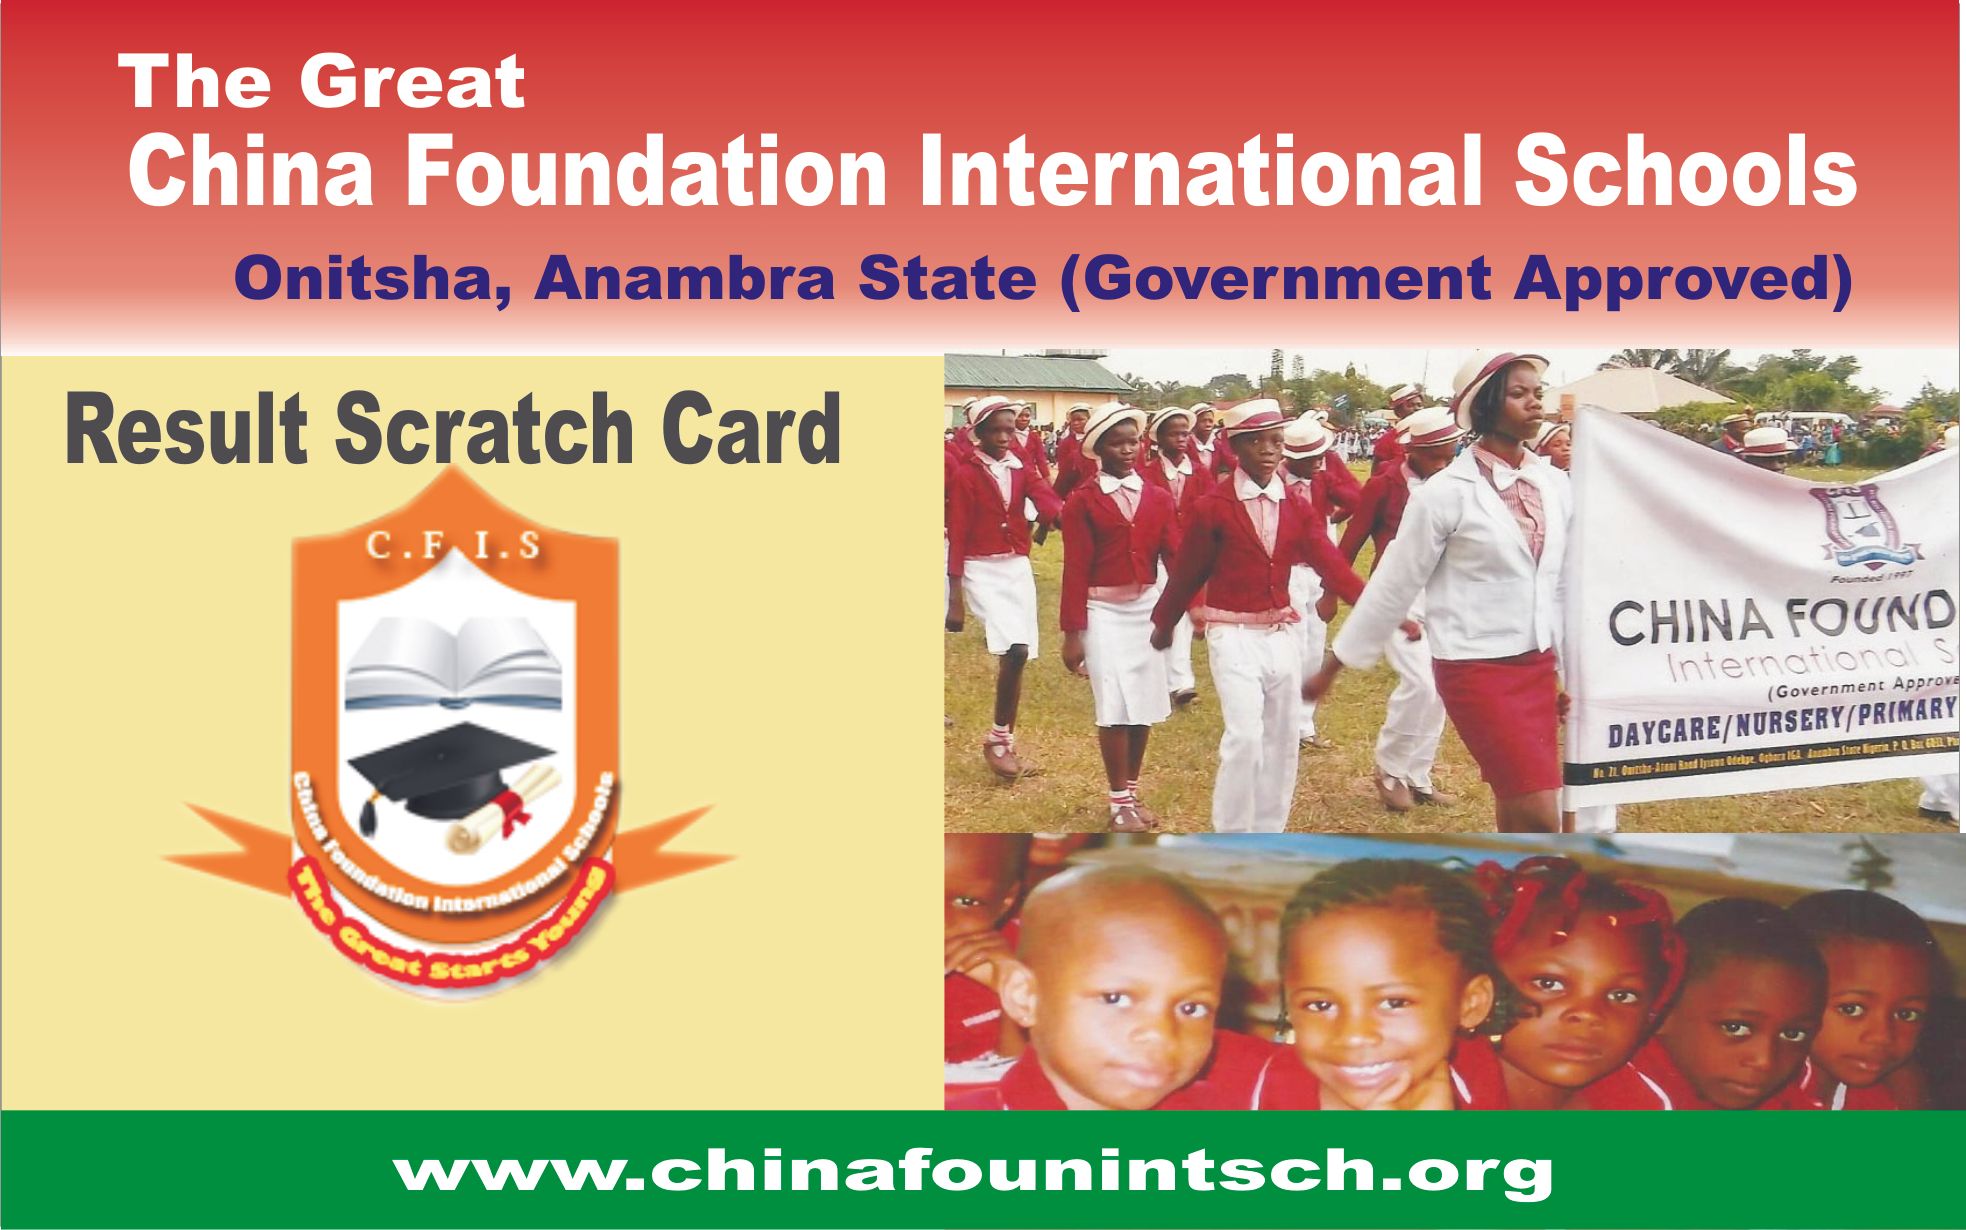 TO PRINT YOUR E-ACCESS SCRATCH CARDS FOR SCHOOLS, CALL CHINEDU ON 09022536974